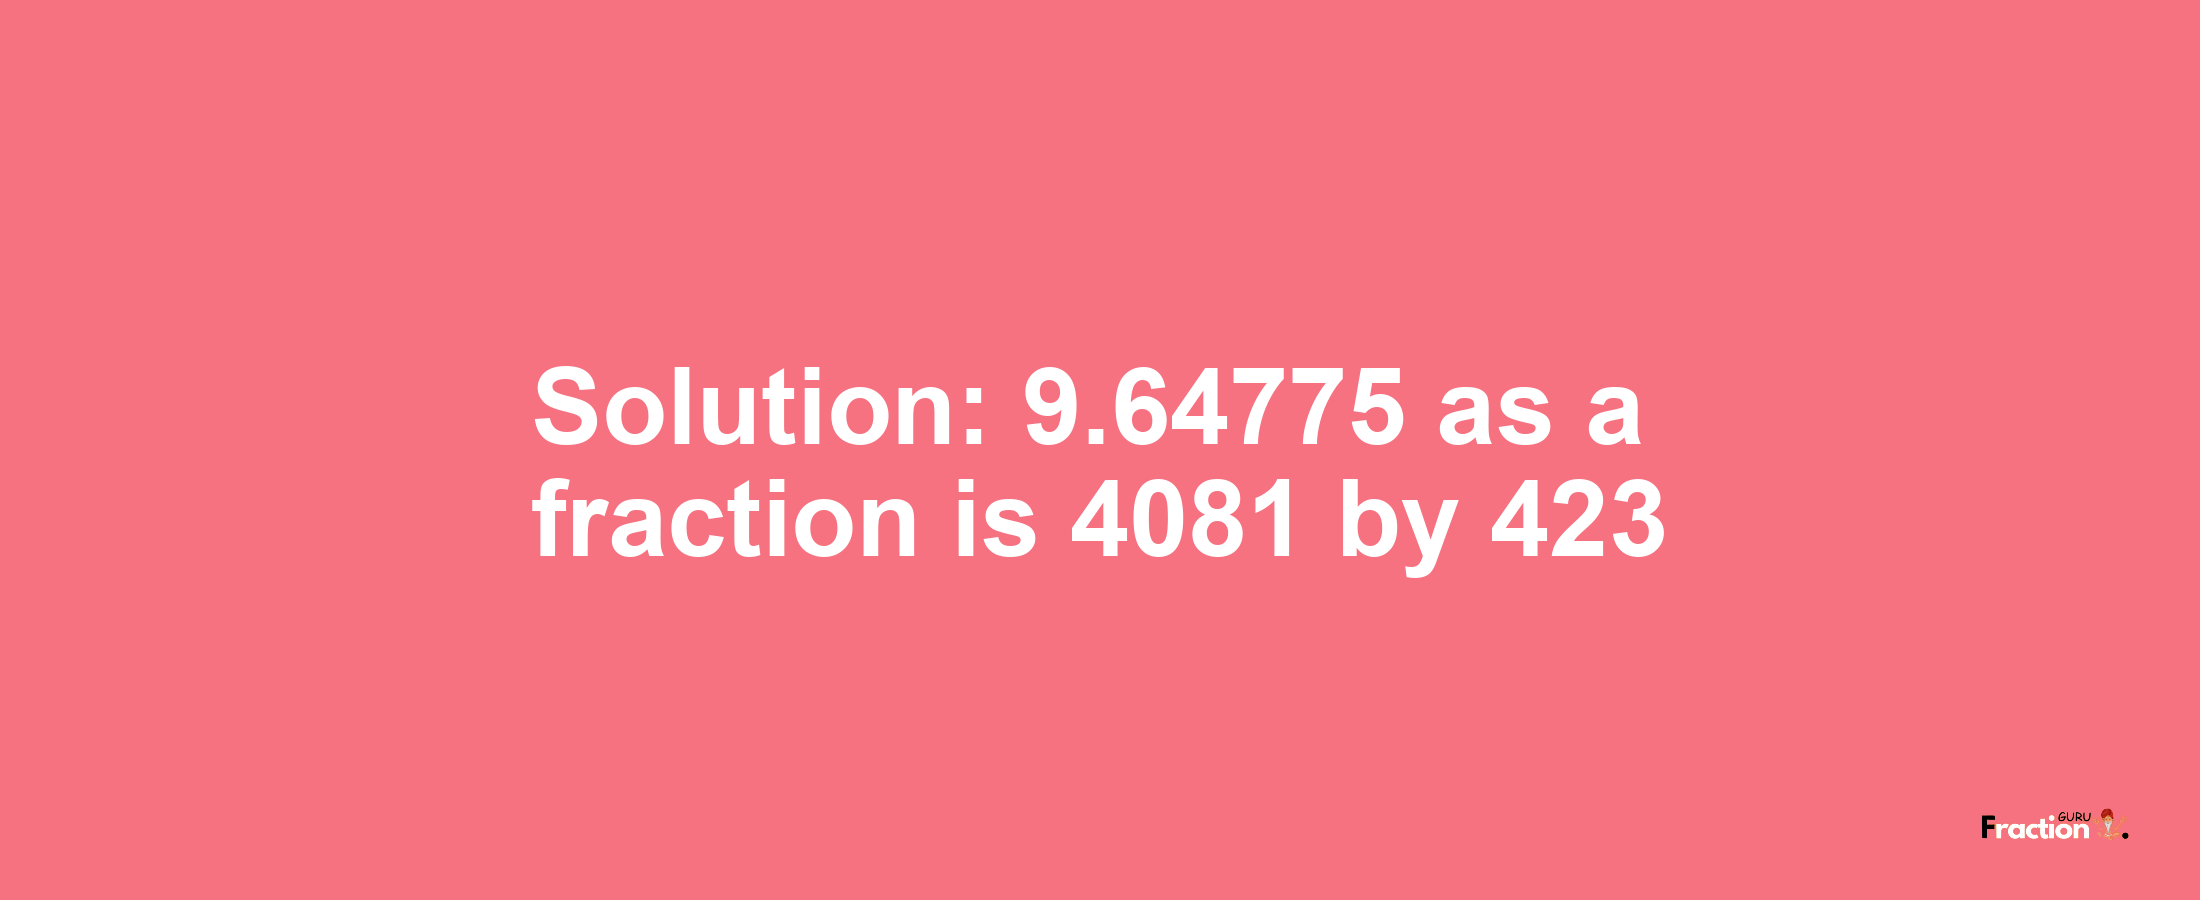 Solution:9.64775 as a fraction is 4081/423